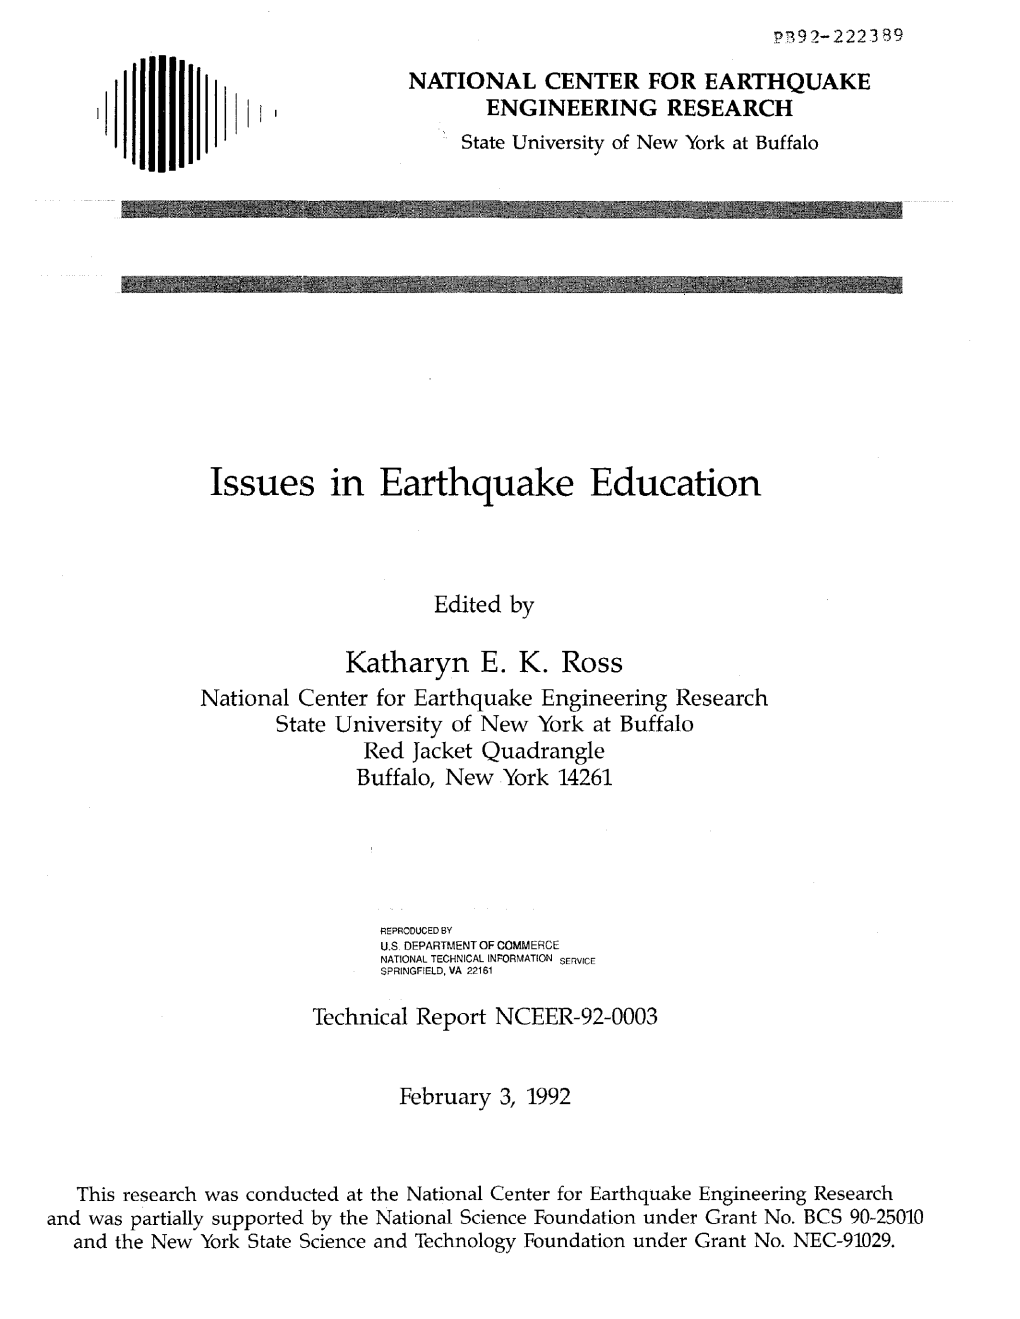 Issues in Earthquake Education